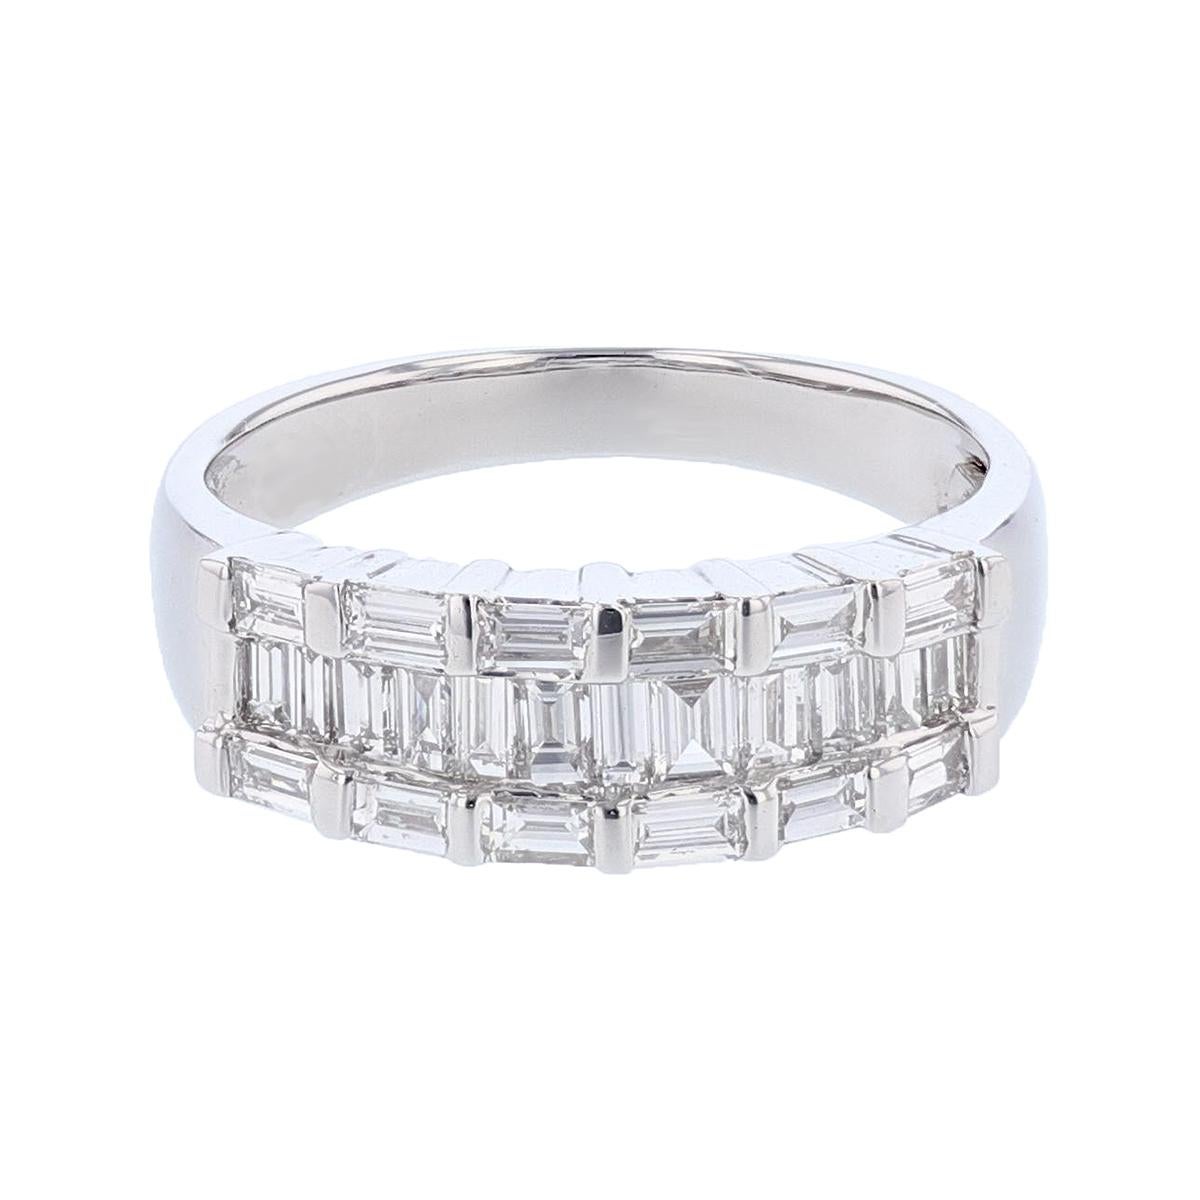 The ring is made in 18k white gold and features 24 baguette cut diamonds, channel set weighing 1.15cts with a color grade (H) and clarity grade (SI2). 